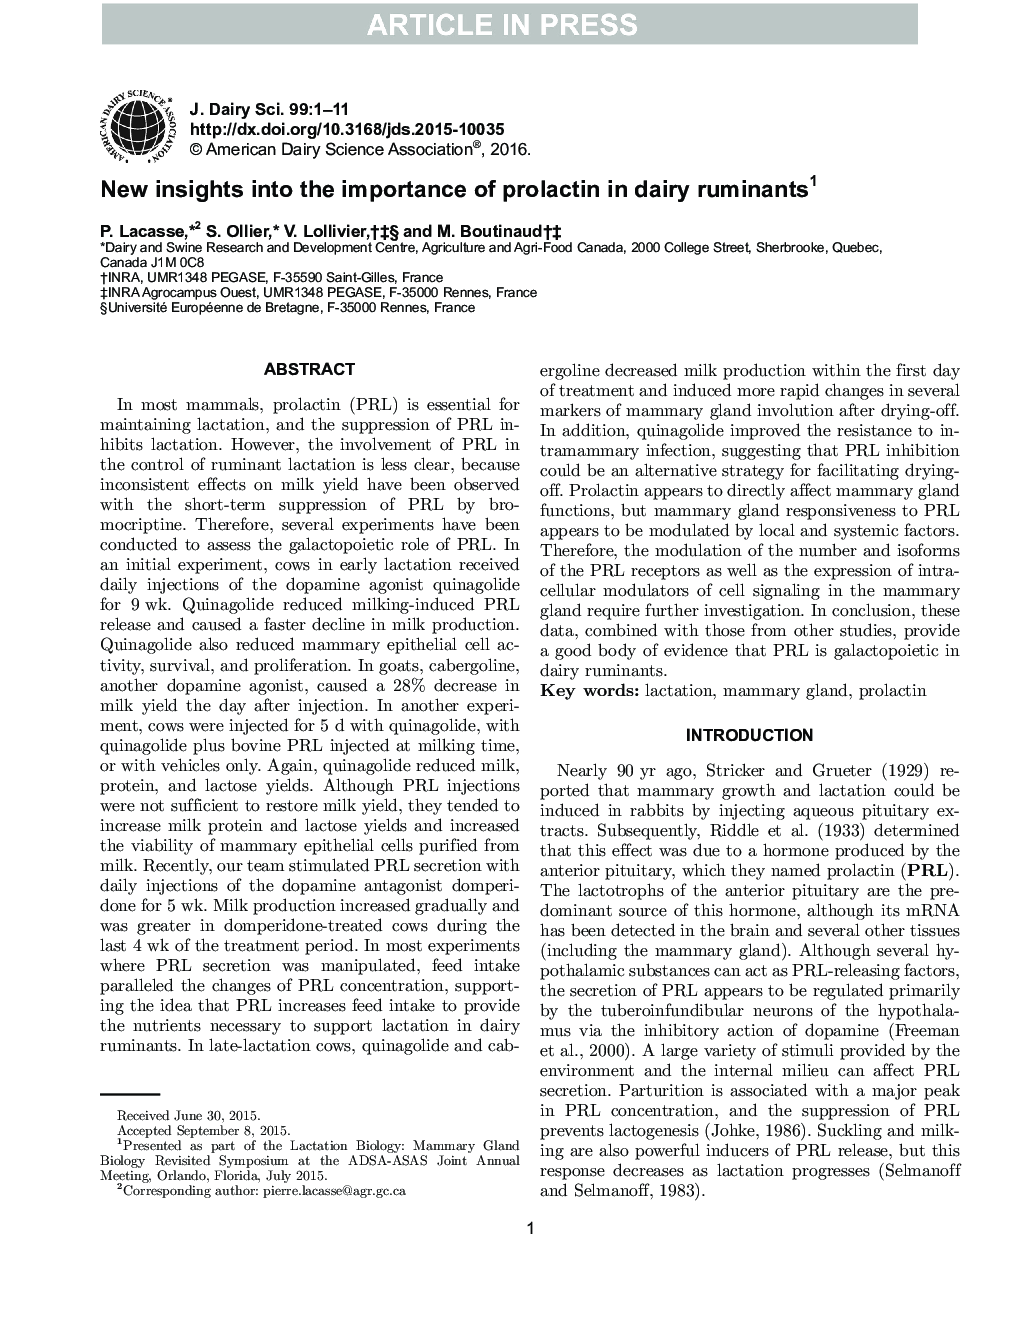 New insights into the importance of prolactin in dairy ruminants1